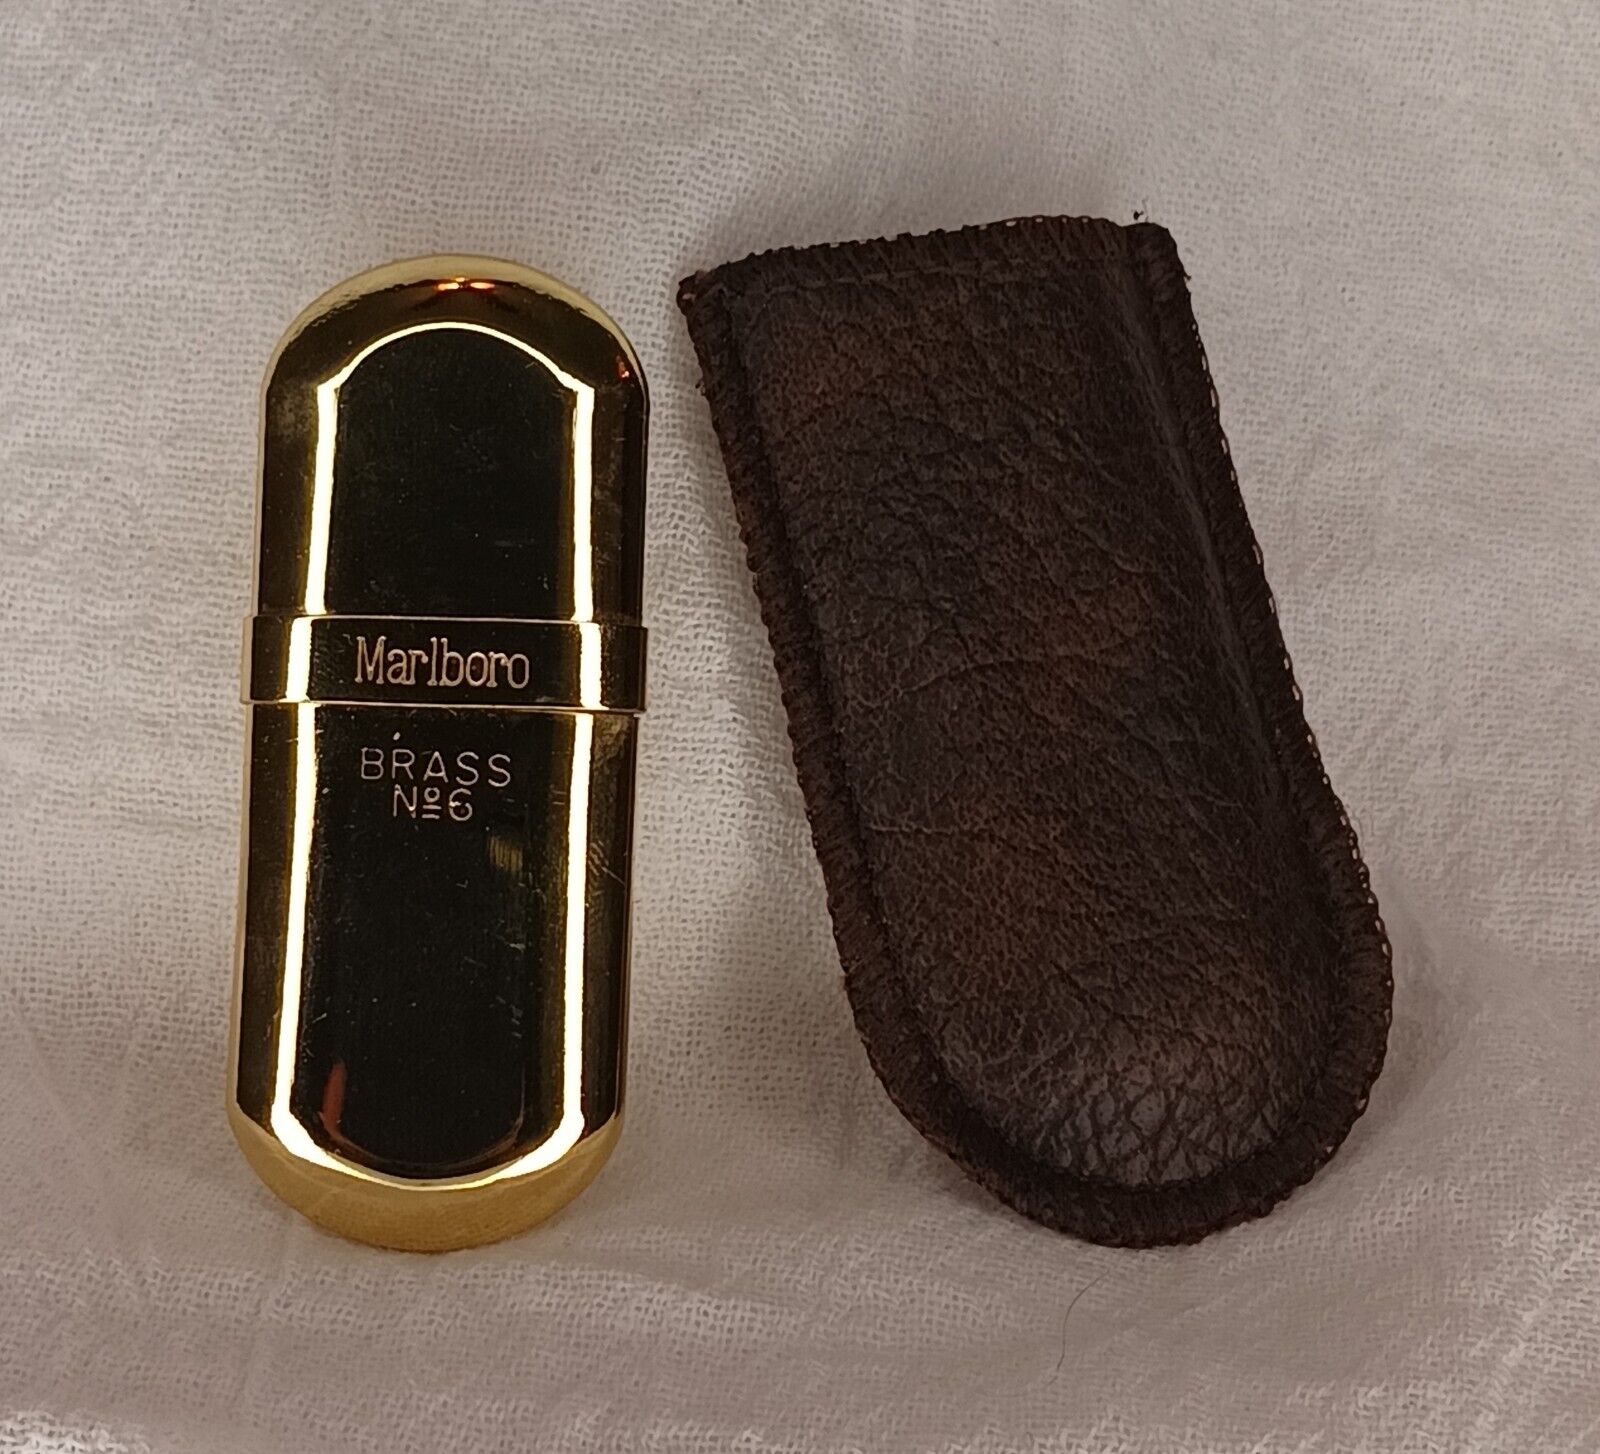 Vintage Marlboro Solid Brass No. 6 Lighter With Pouch